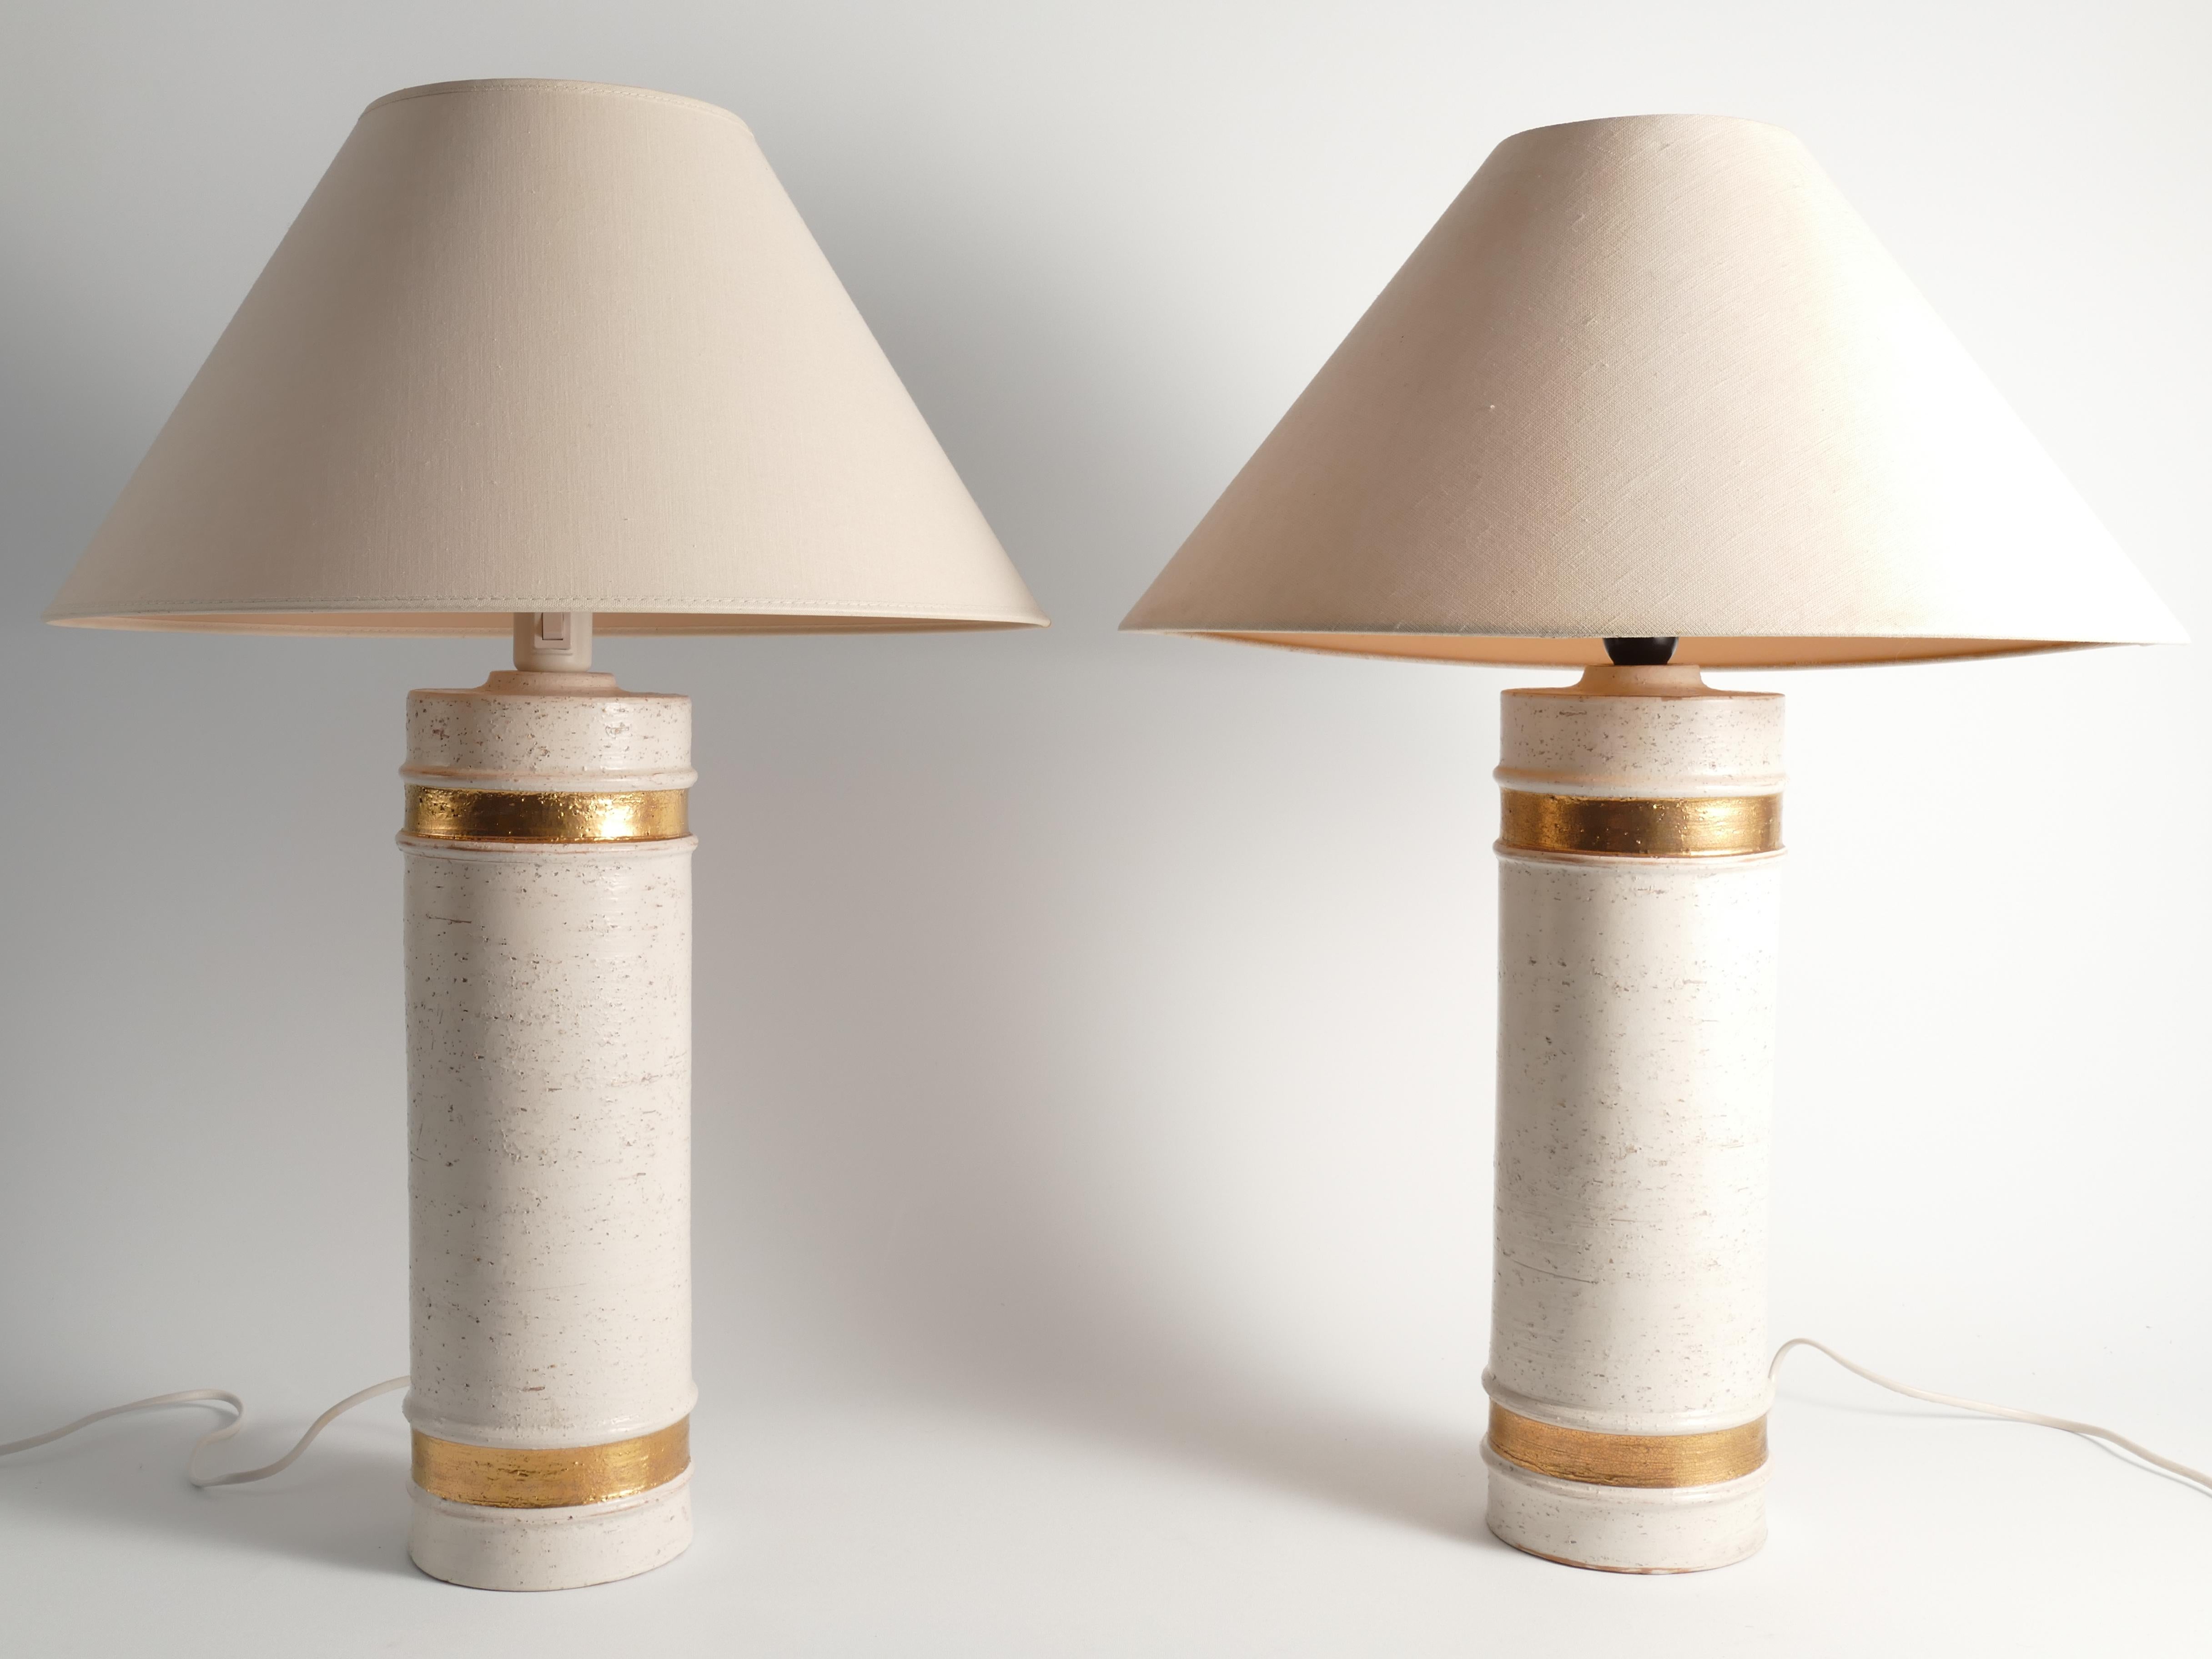 Mid-century Modern Ceramic Table Lamps by Bitossi for Bergboms, Set of 2, 1970's For Sale 6